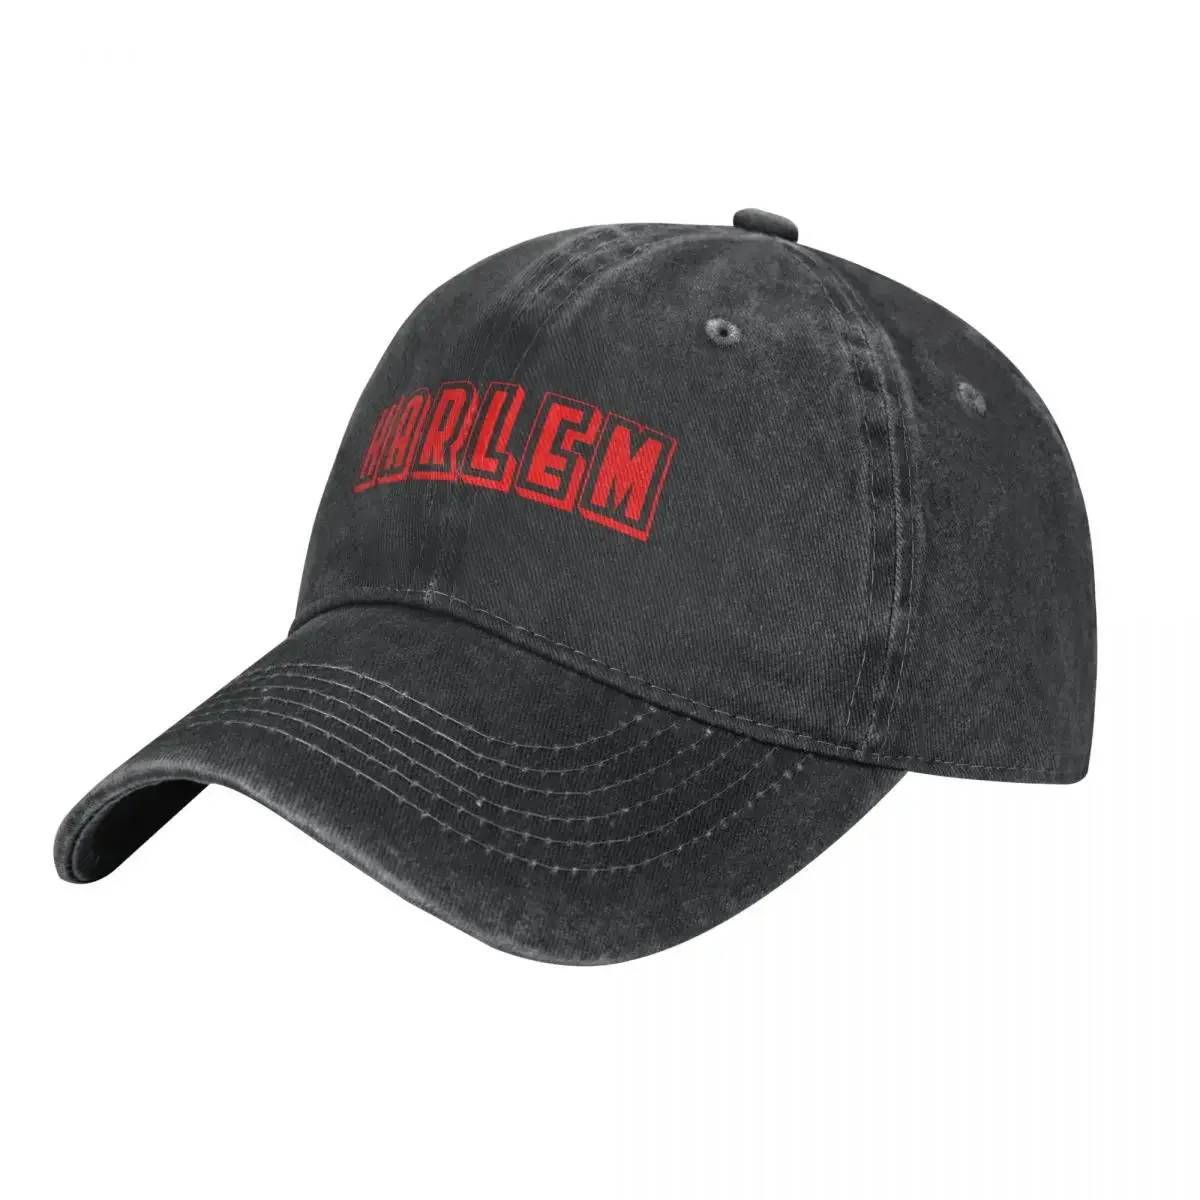 

Harlem Text With Border Cowboy Hat Rave Snap Back Hat Male Women's